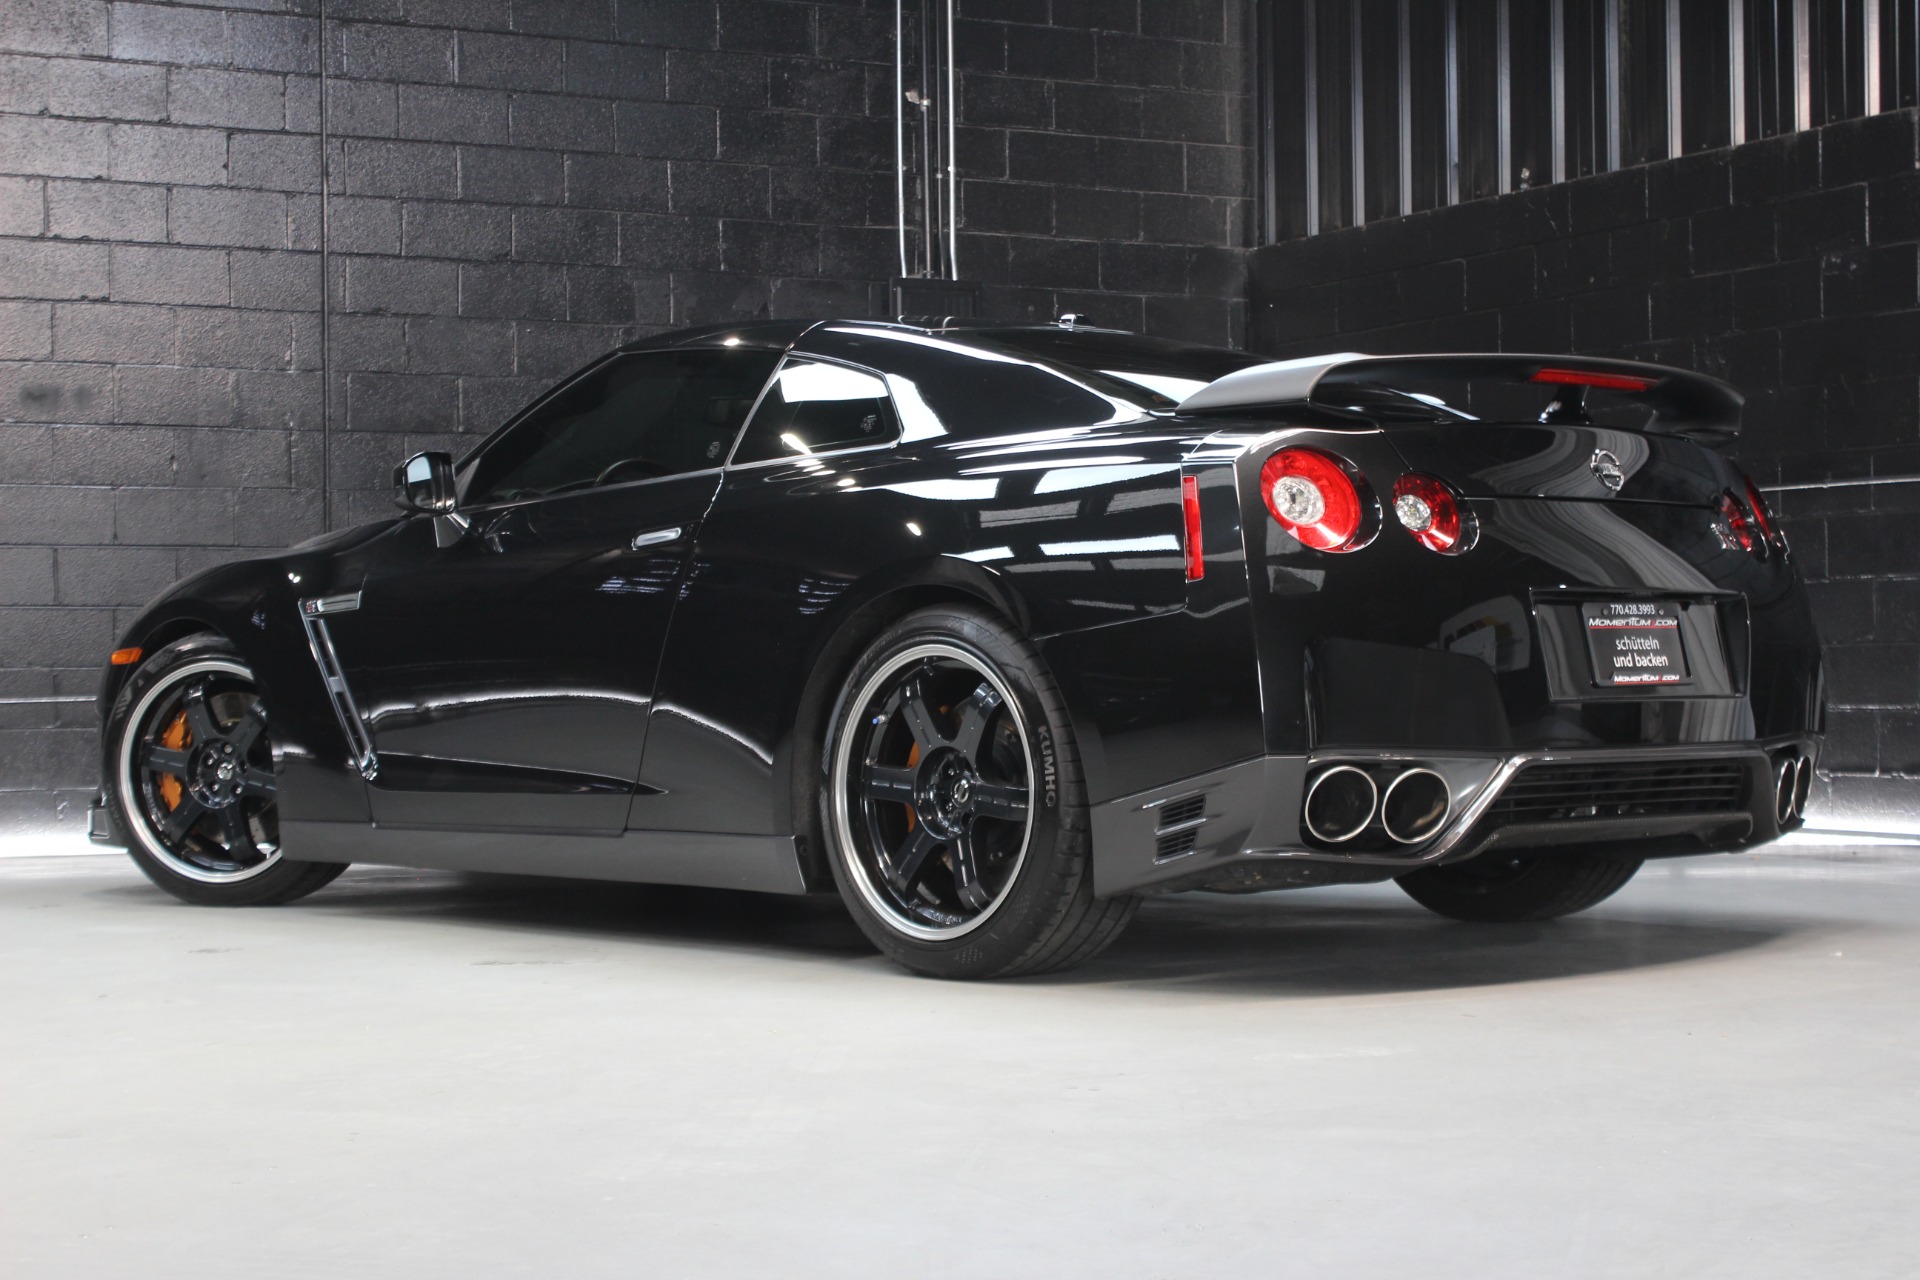 Used 2014 Nissan GT-R Black Edition For Sale (Sold) | Momentum